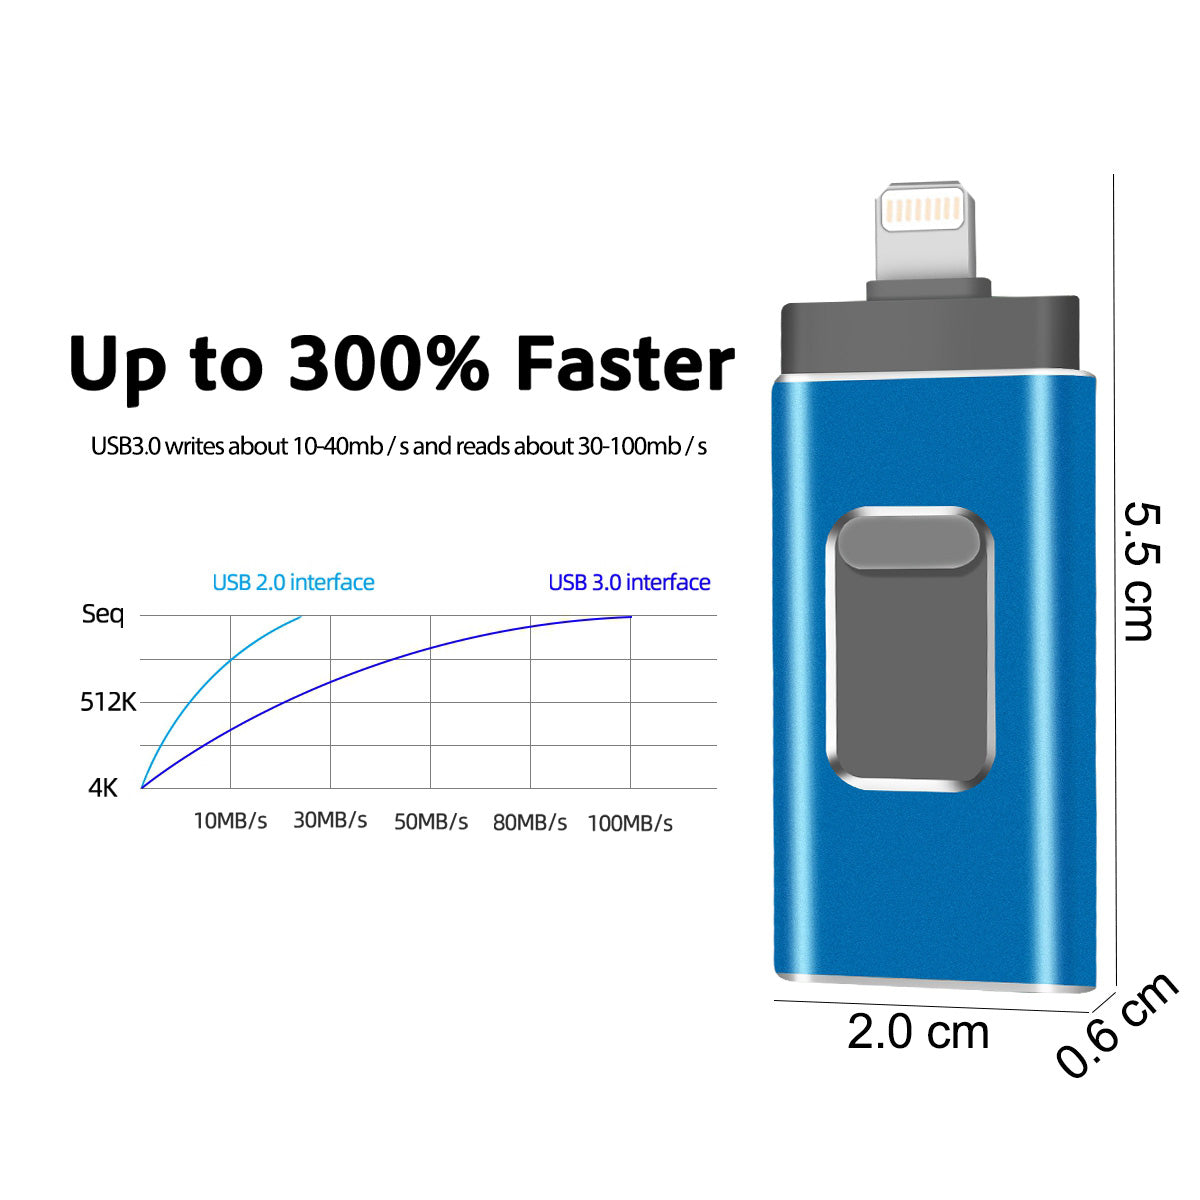 Uniqkart R-01B 8GB High Speed USB 3.0 Flash Drive 3 in 1 Photo Stick for iPhone Android PC Memory Stick - Blue